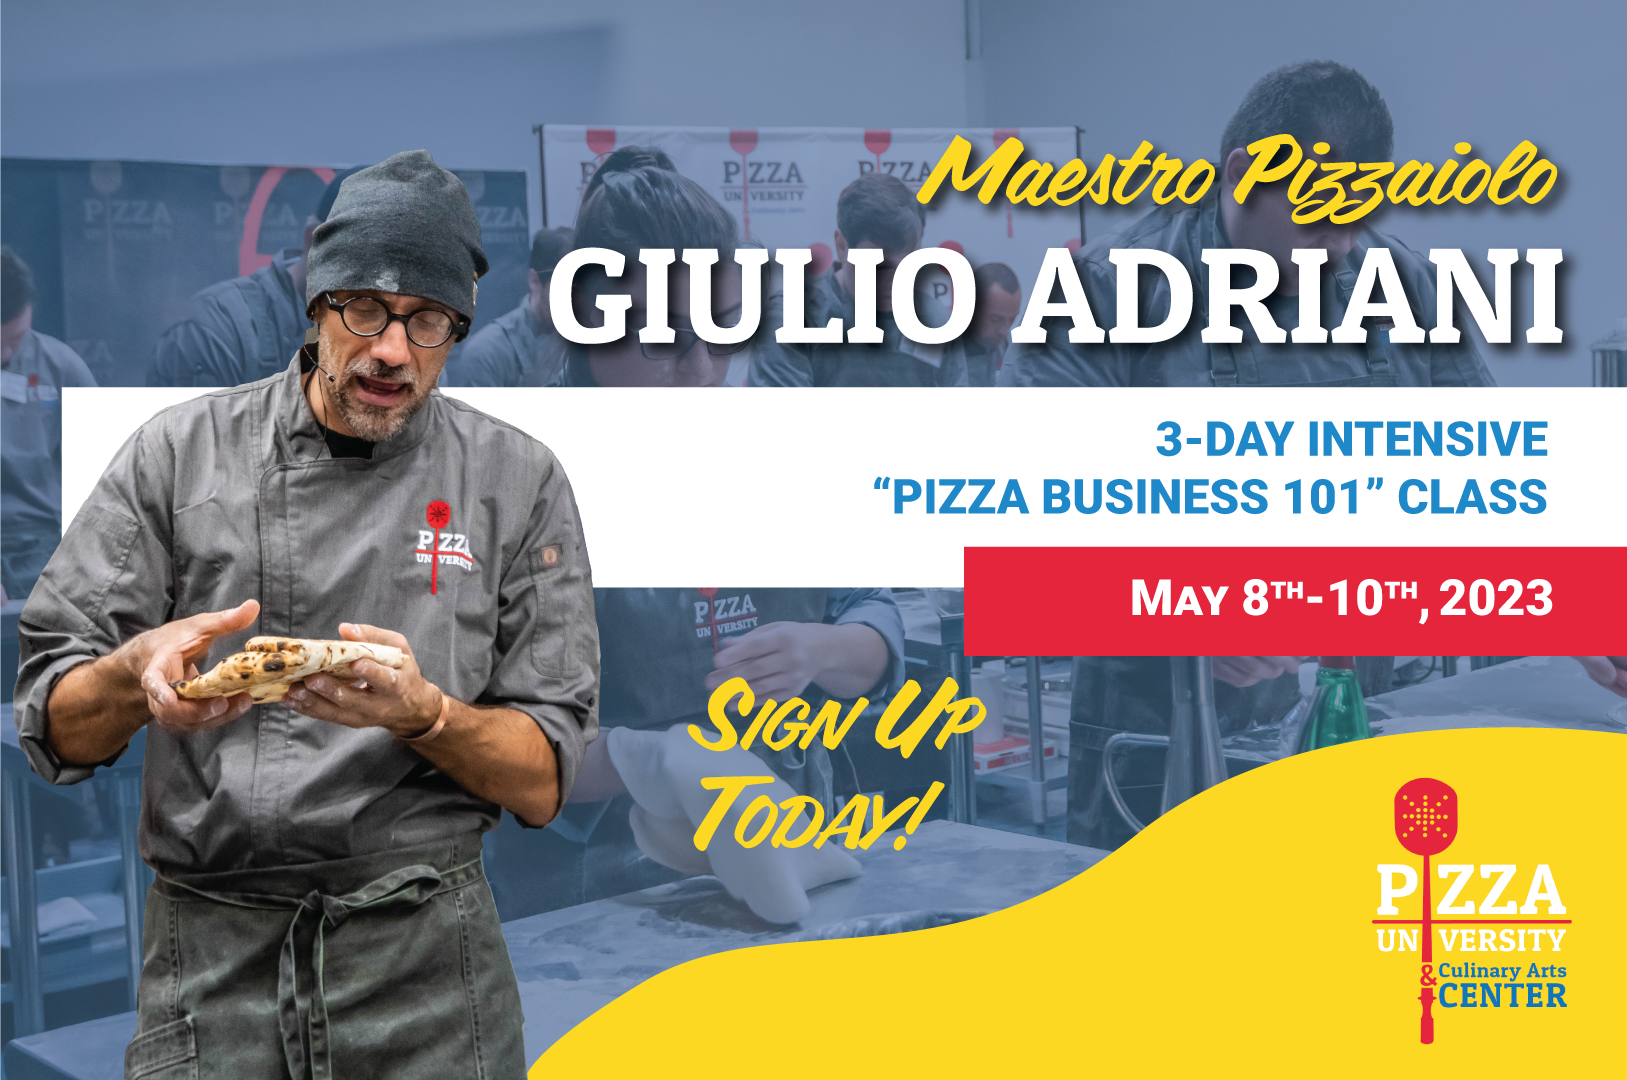 3-Day Intensive “Pizza Business 101” Class with Giulio Adriani